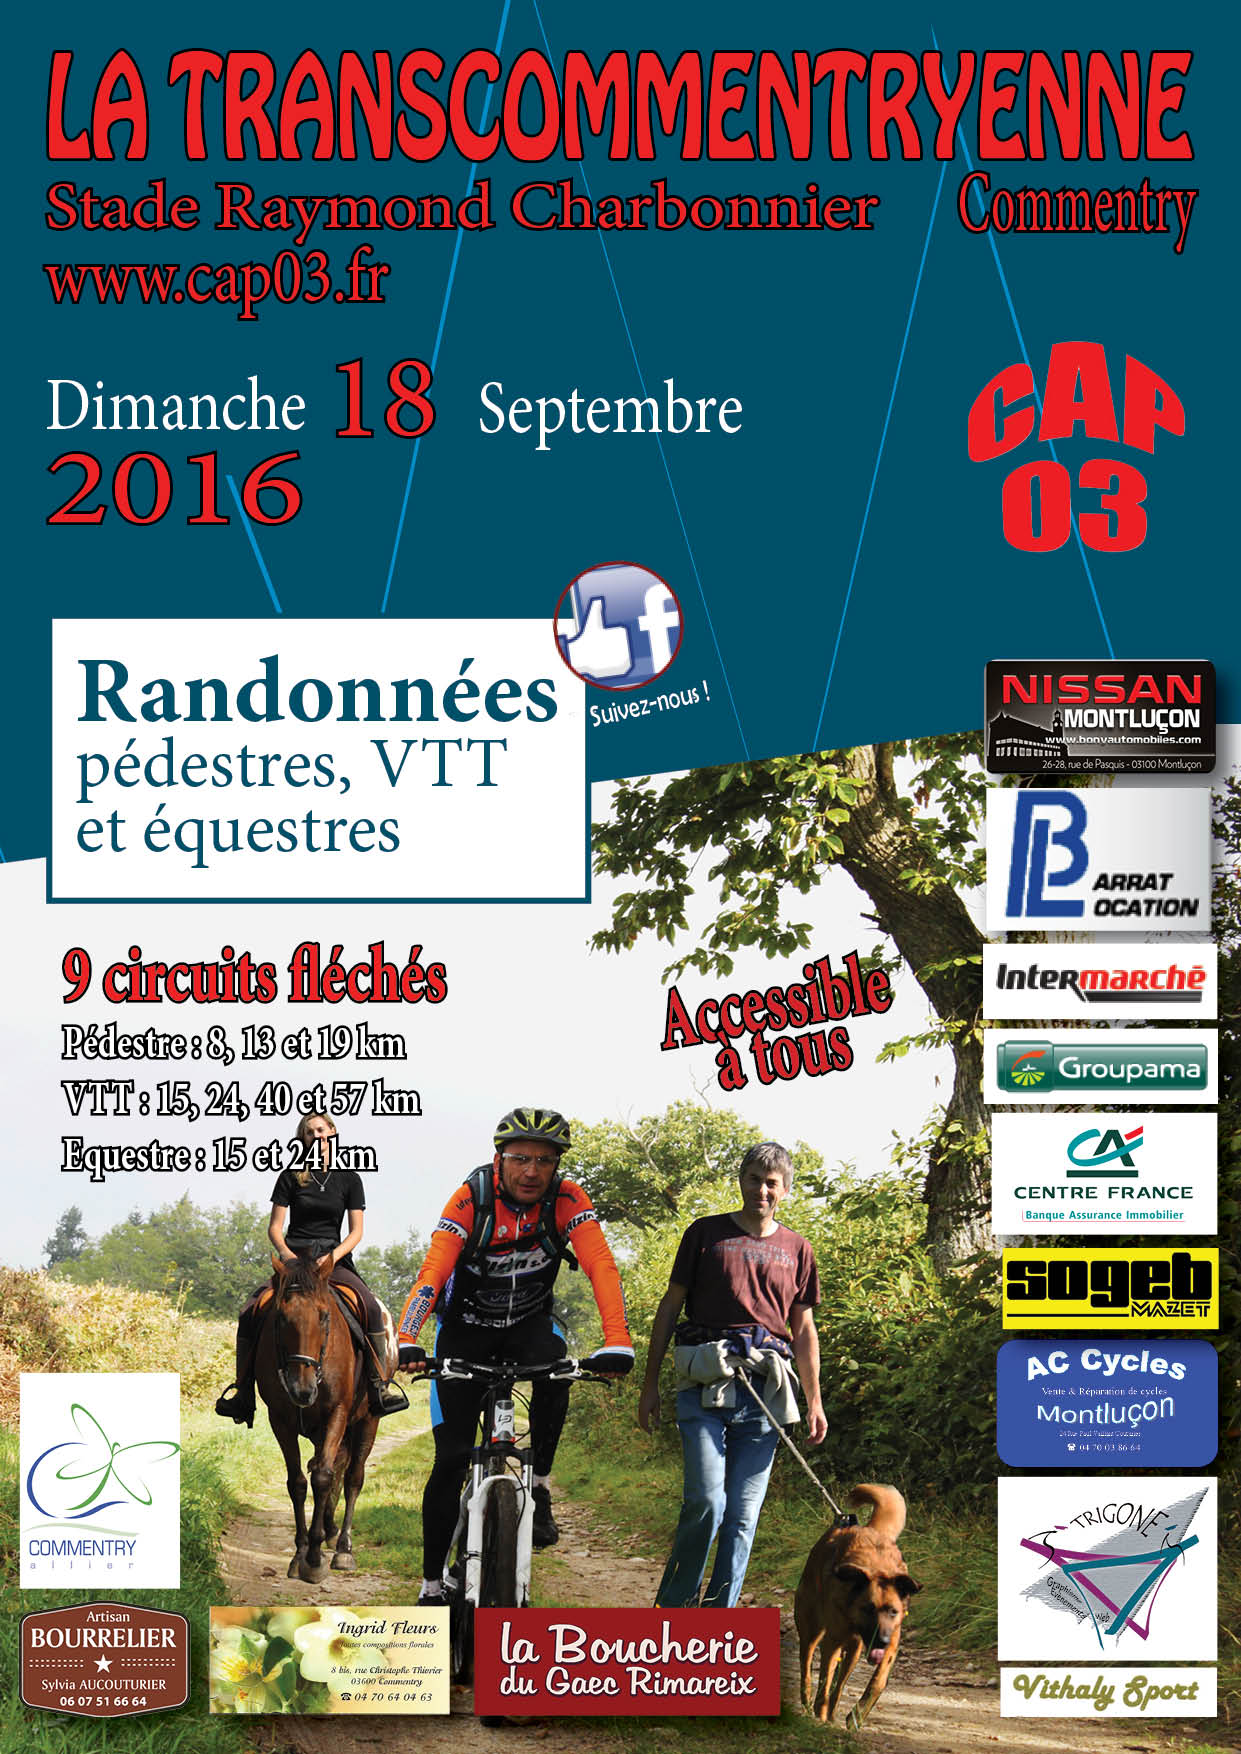 Affiche Transcommentryenne 2016 A4